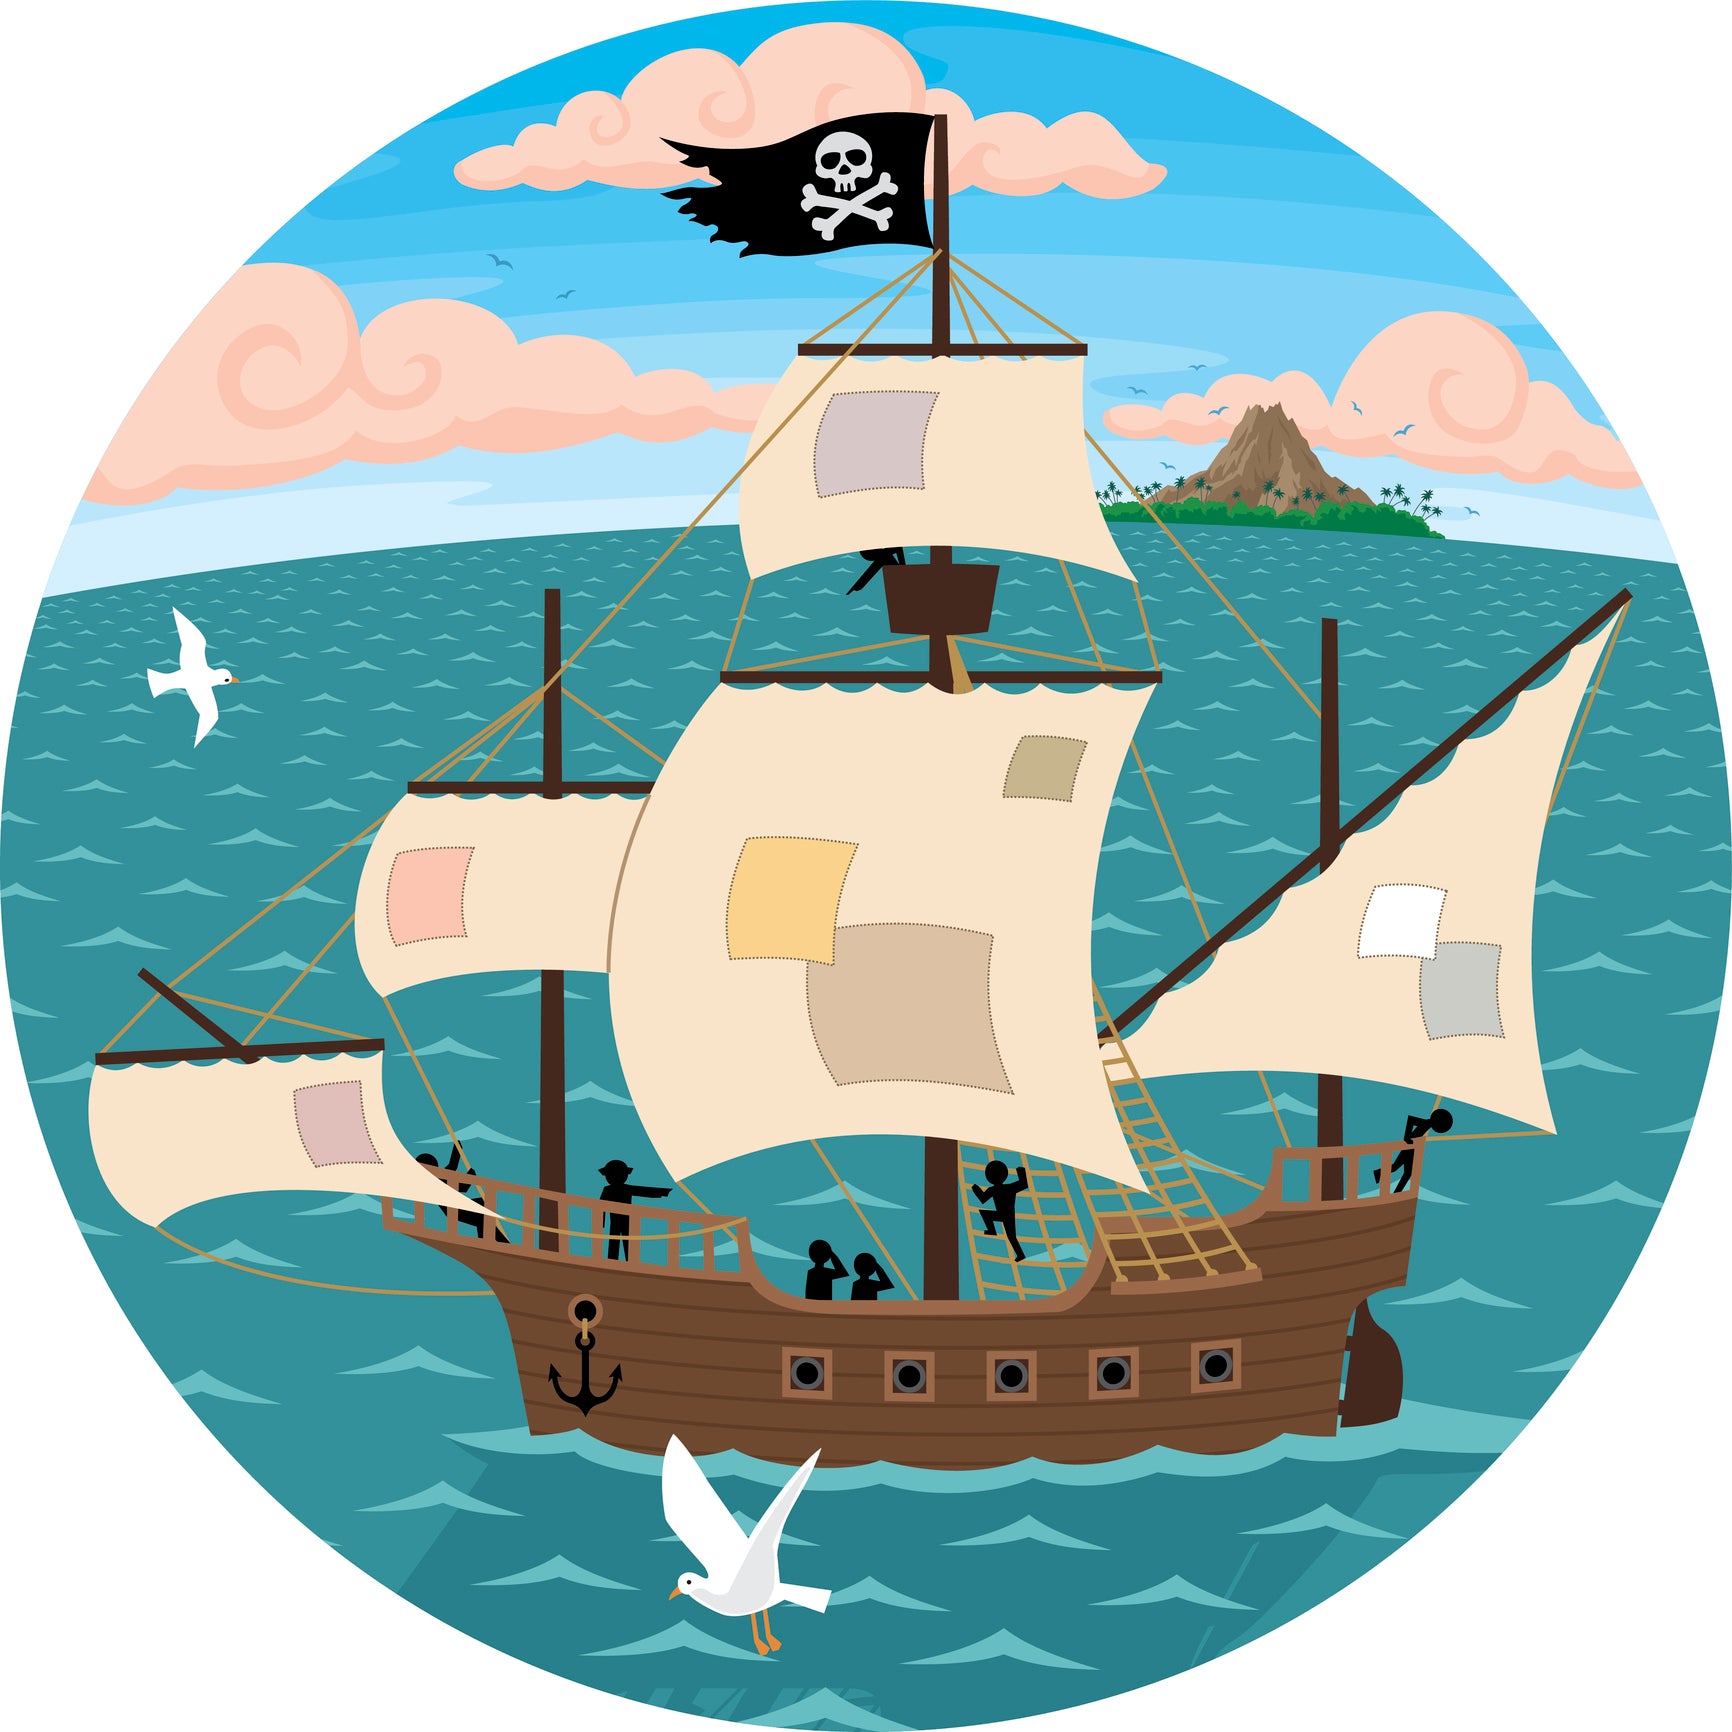 Pirate Ship with Patched Sails in Tropical Waters Cartoon Icon Vinyl Decal Sticker